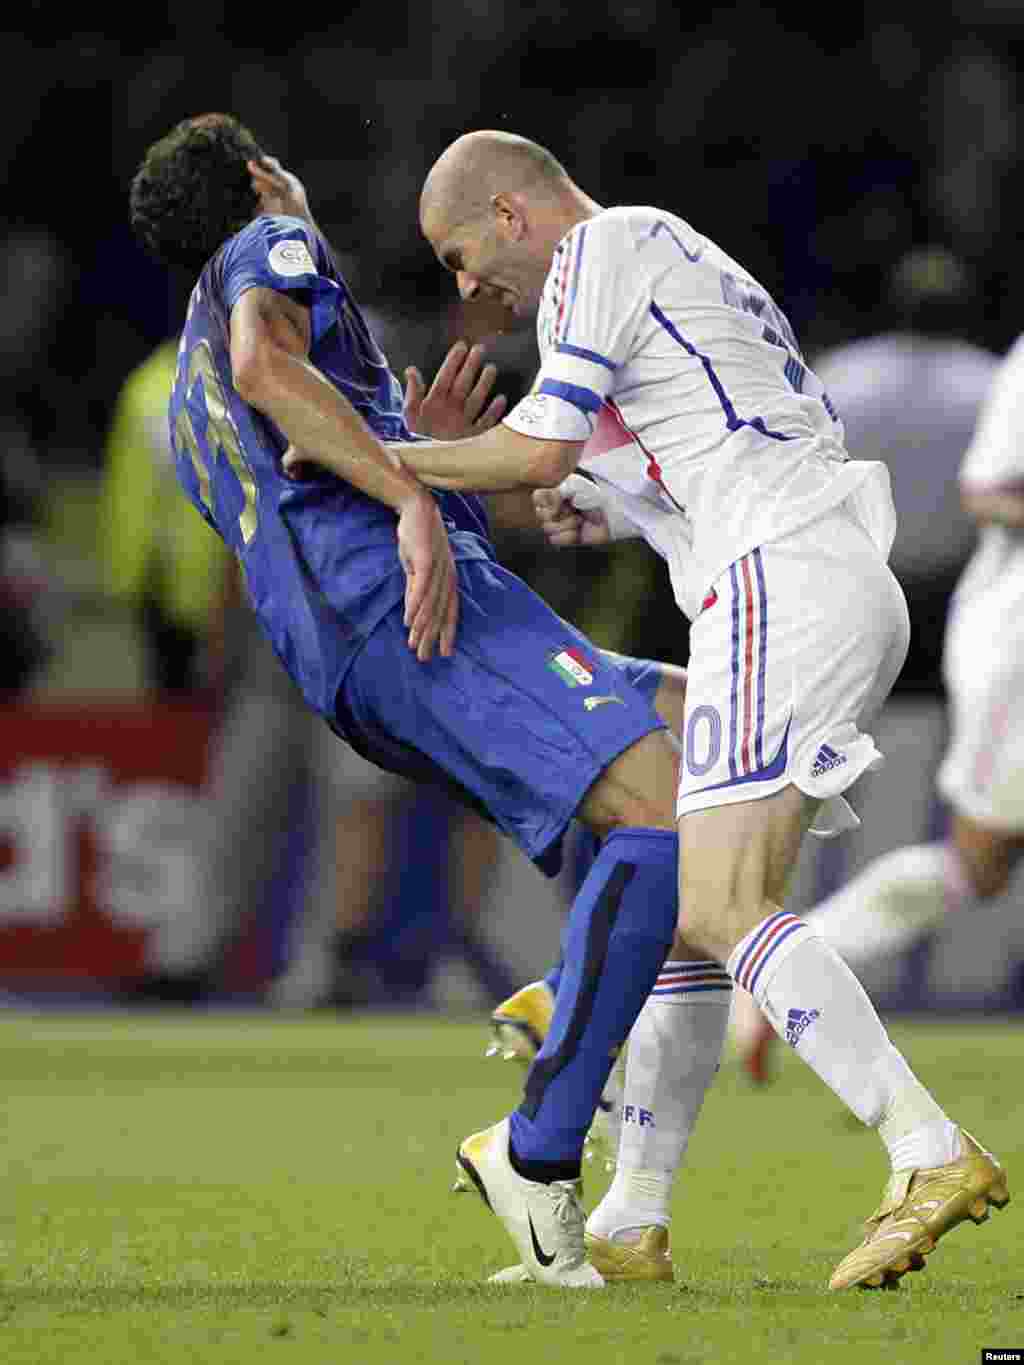 Italy's Marco Materazzi falls on the pitch after being head-butted by France's Zinedine Zidane (R) during their World Cup 2006 final soccer match in Berlin July 9, 2006. REUTERS/Peter Schols/GPD/Handout 